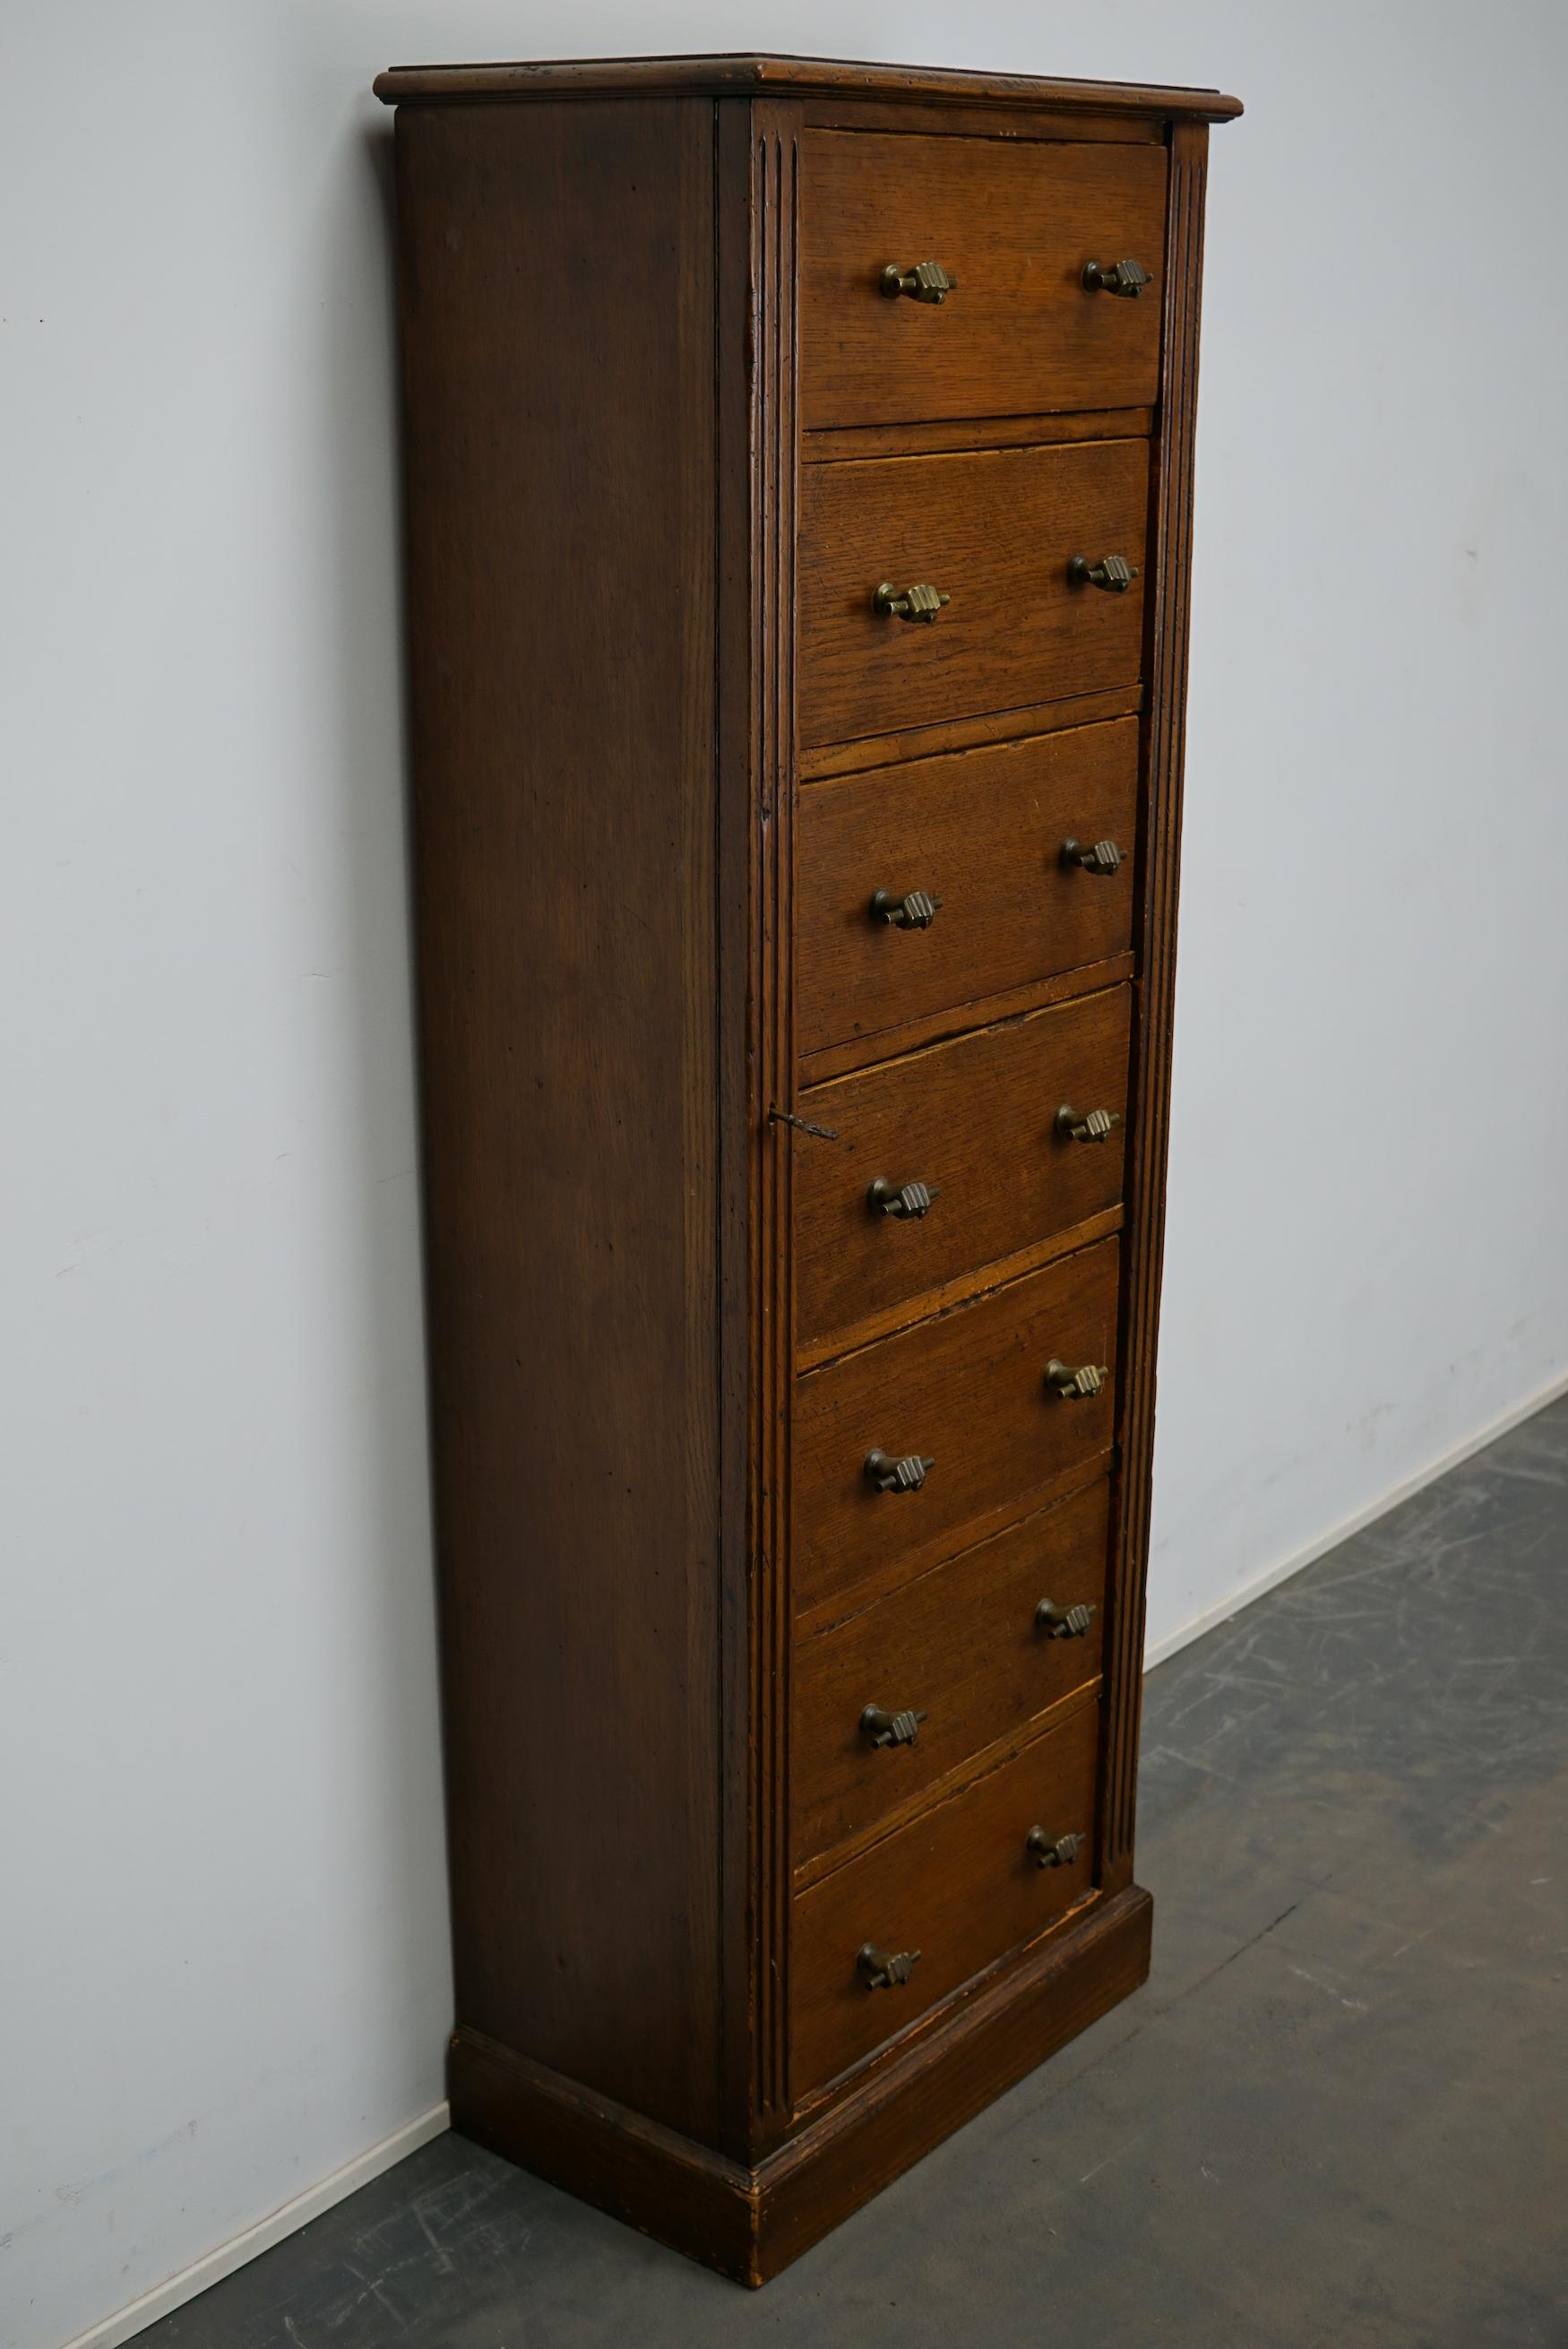 This apothecary cabinet with large drawers was made circa 1950s in the Netherlands. It features 7 drawers in oak veneer with very special hand shaped handles. It remains in a good restored condition. The drawers are lockable with the original key.